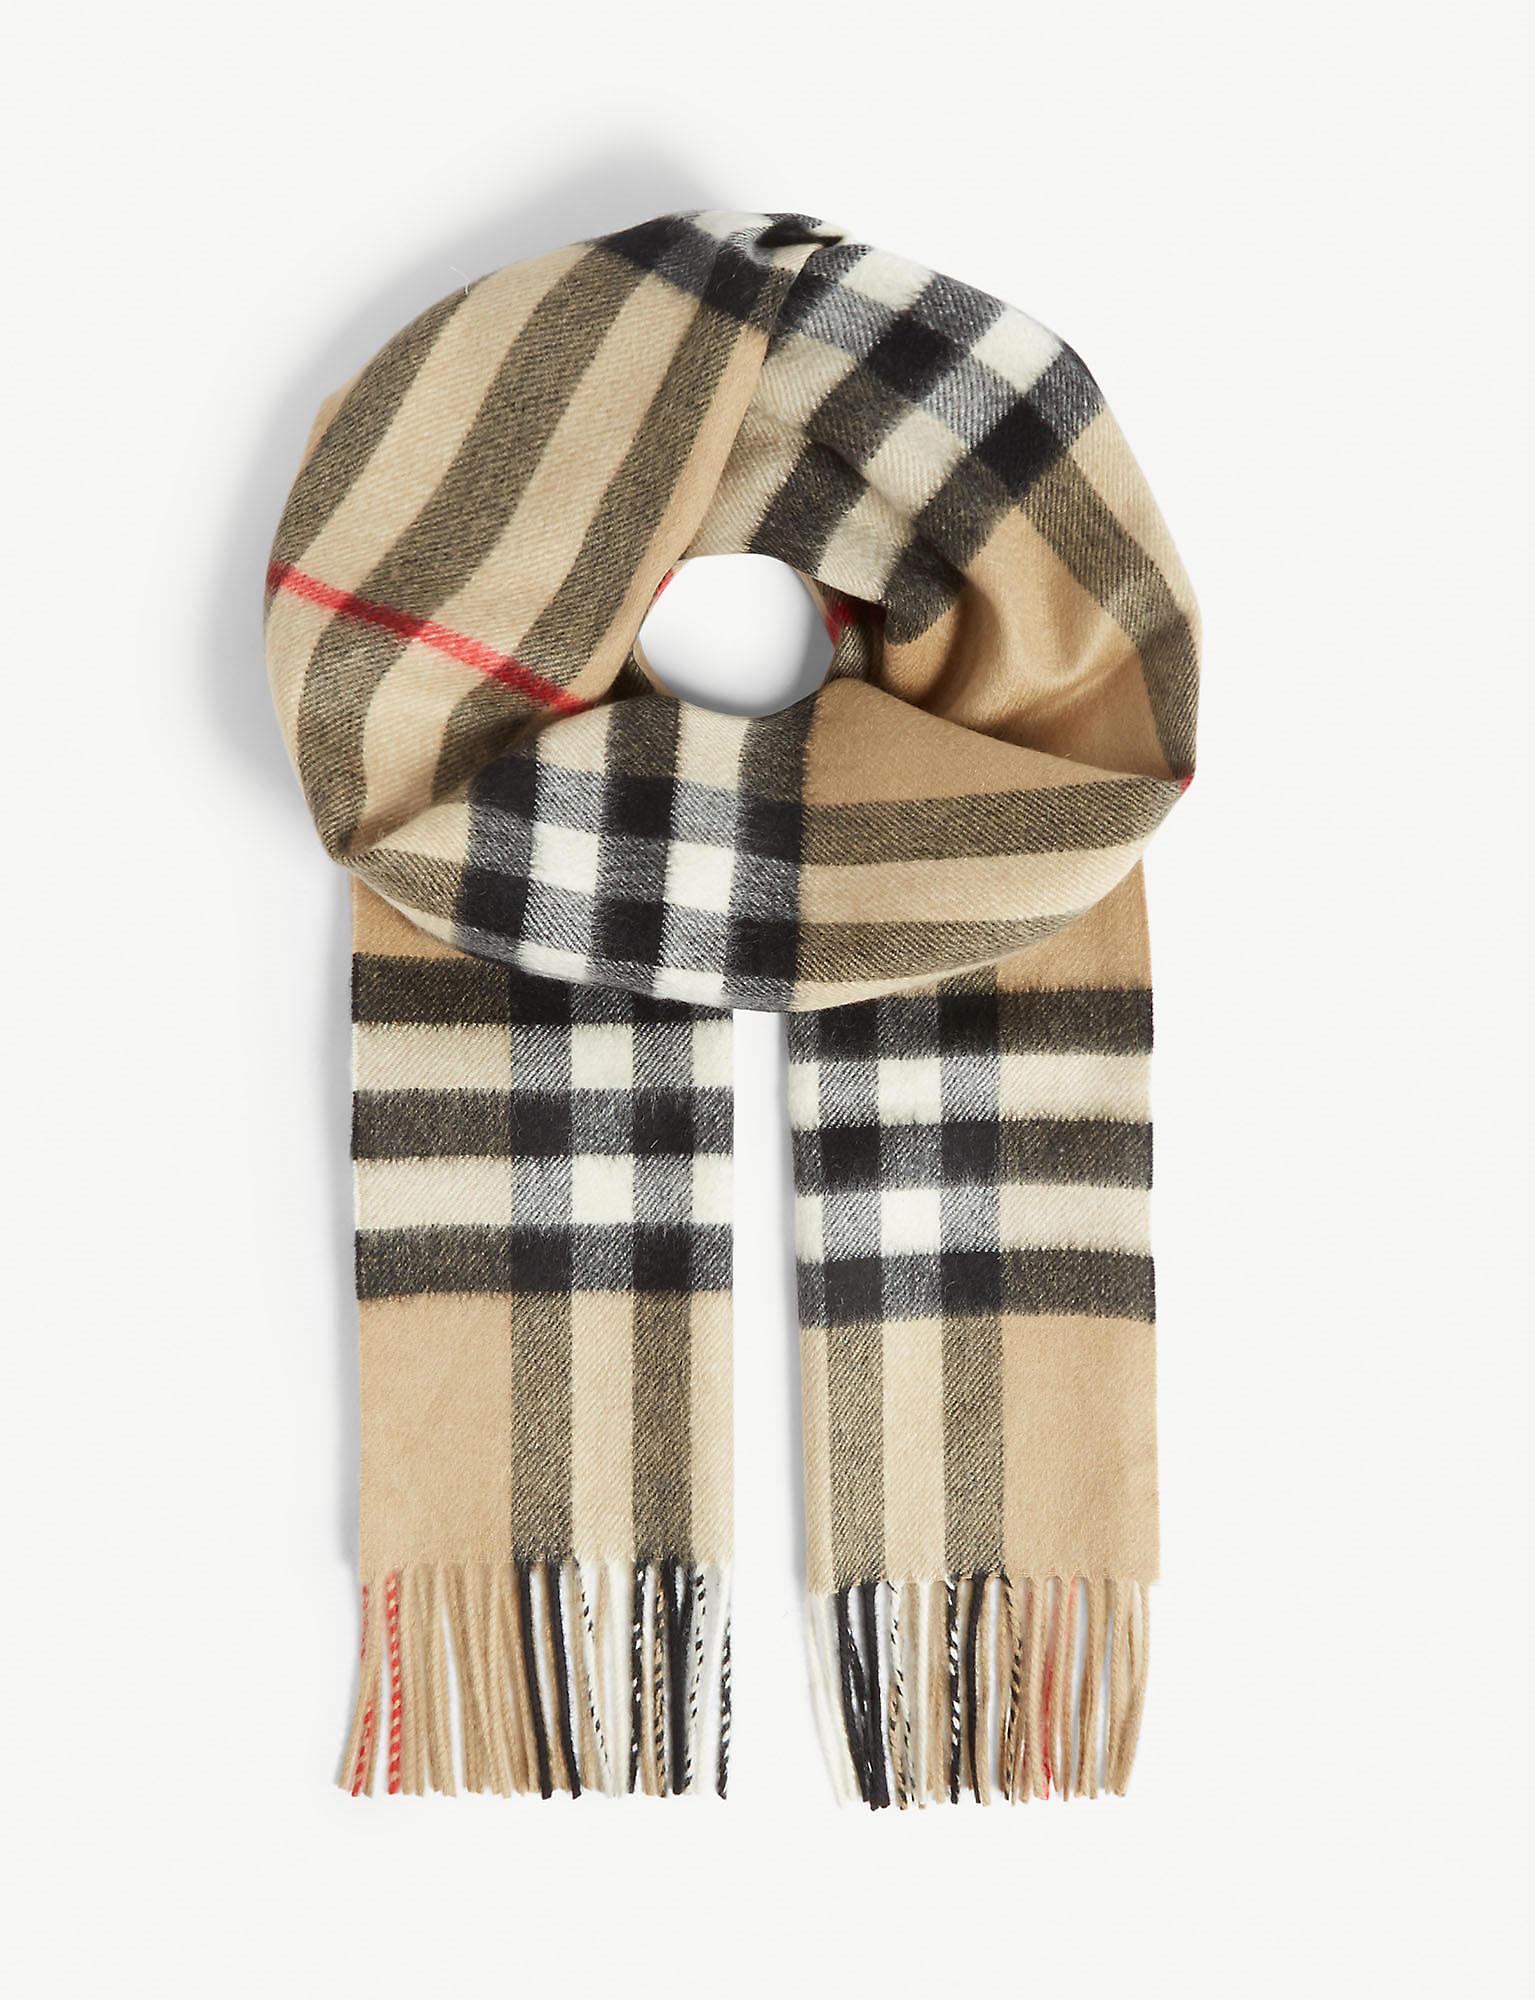 Burberry Giant Check Cashmere Scarf in Natural for Men - Lyst